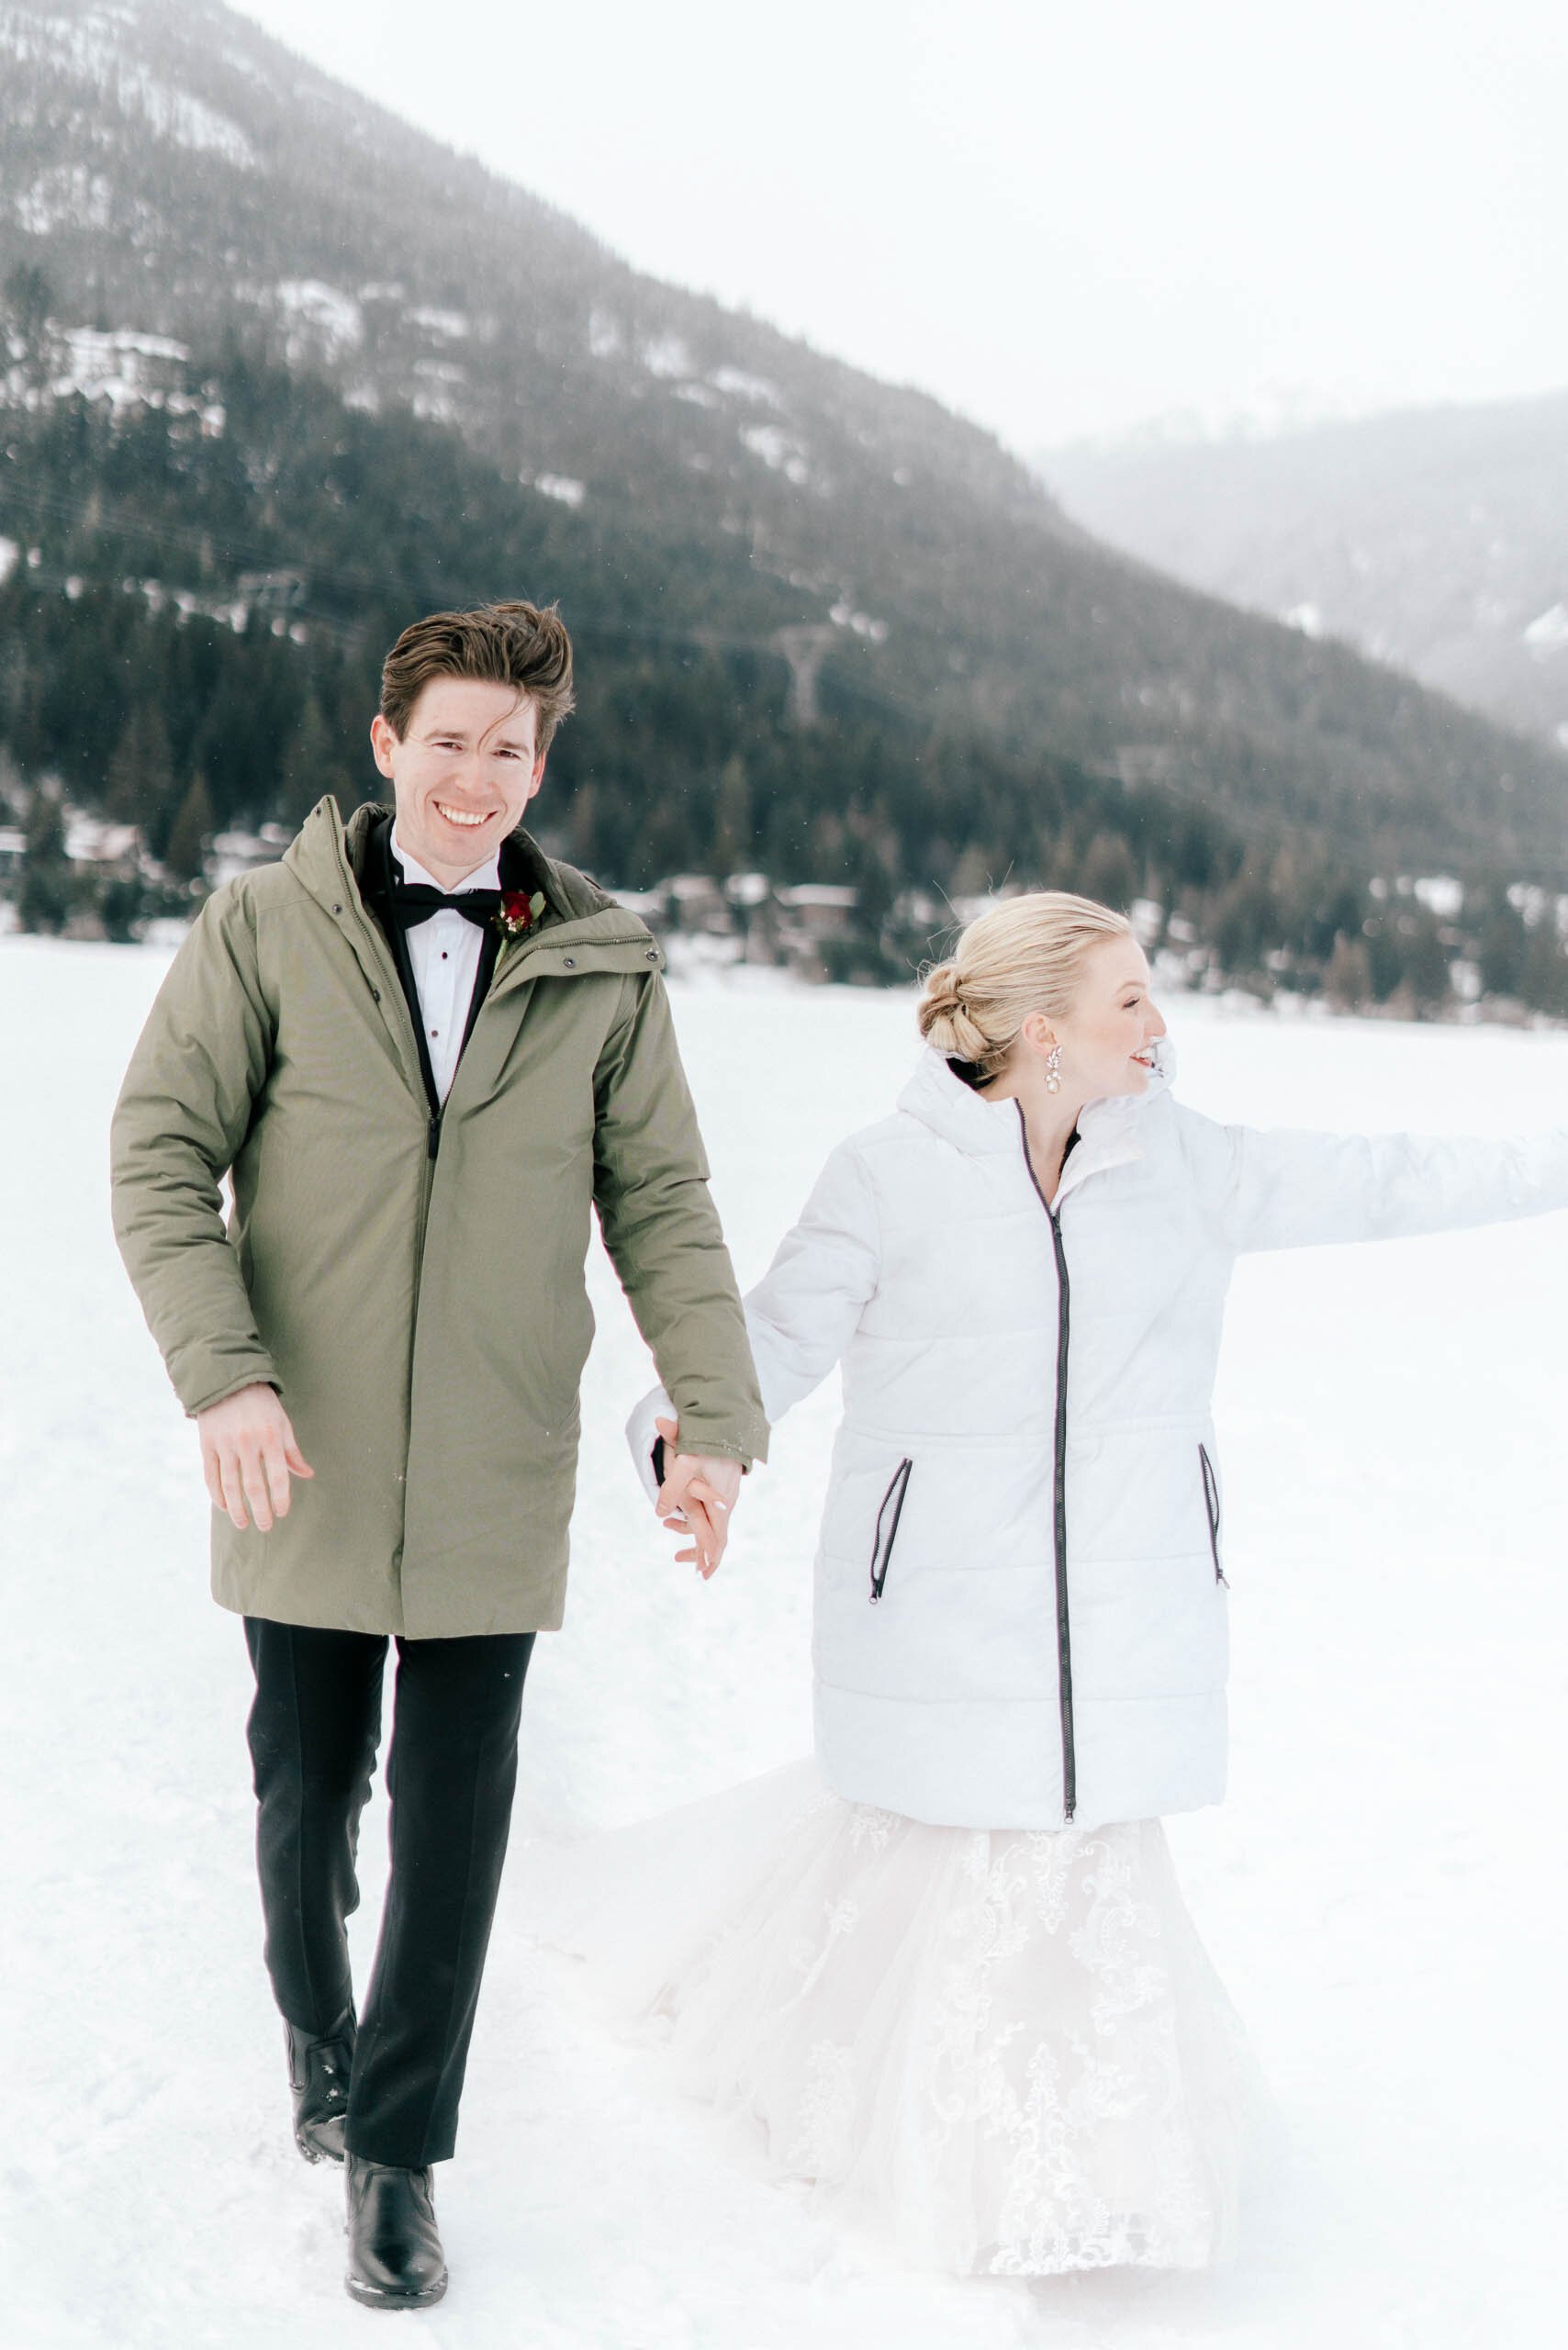 A bride and groom walk through the snow while wearing winter jackets over their wedding attire. 